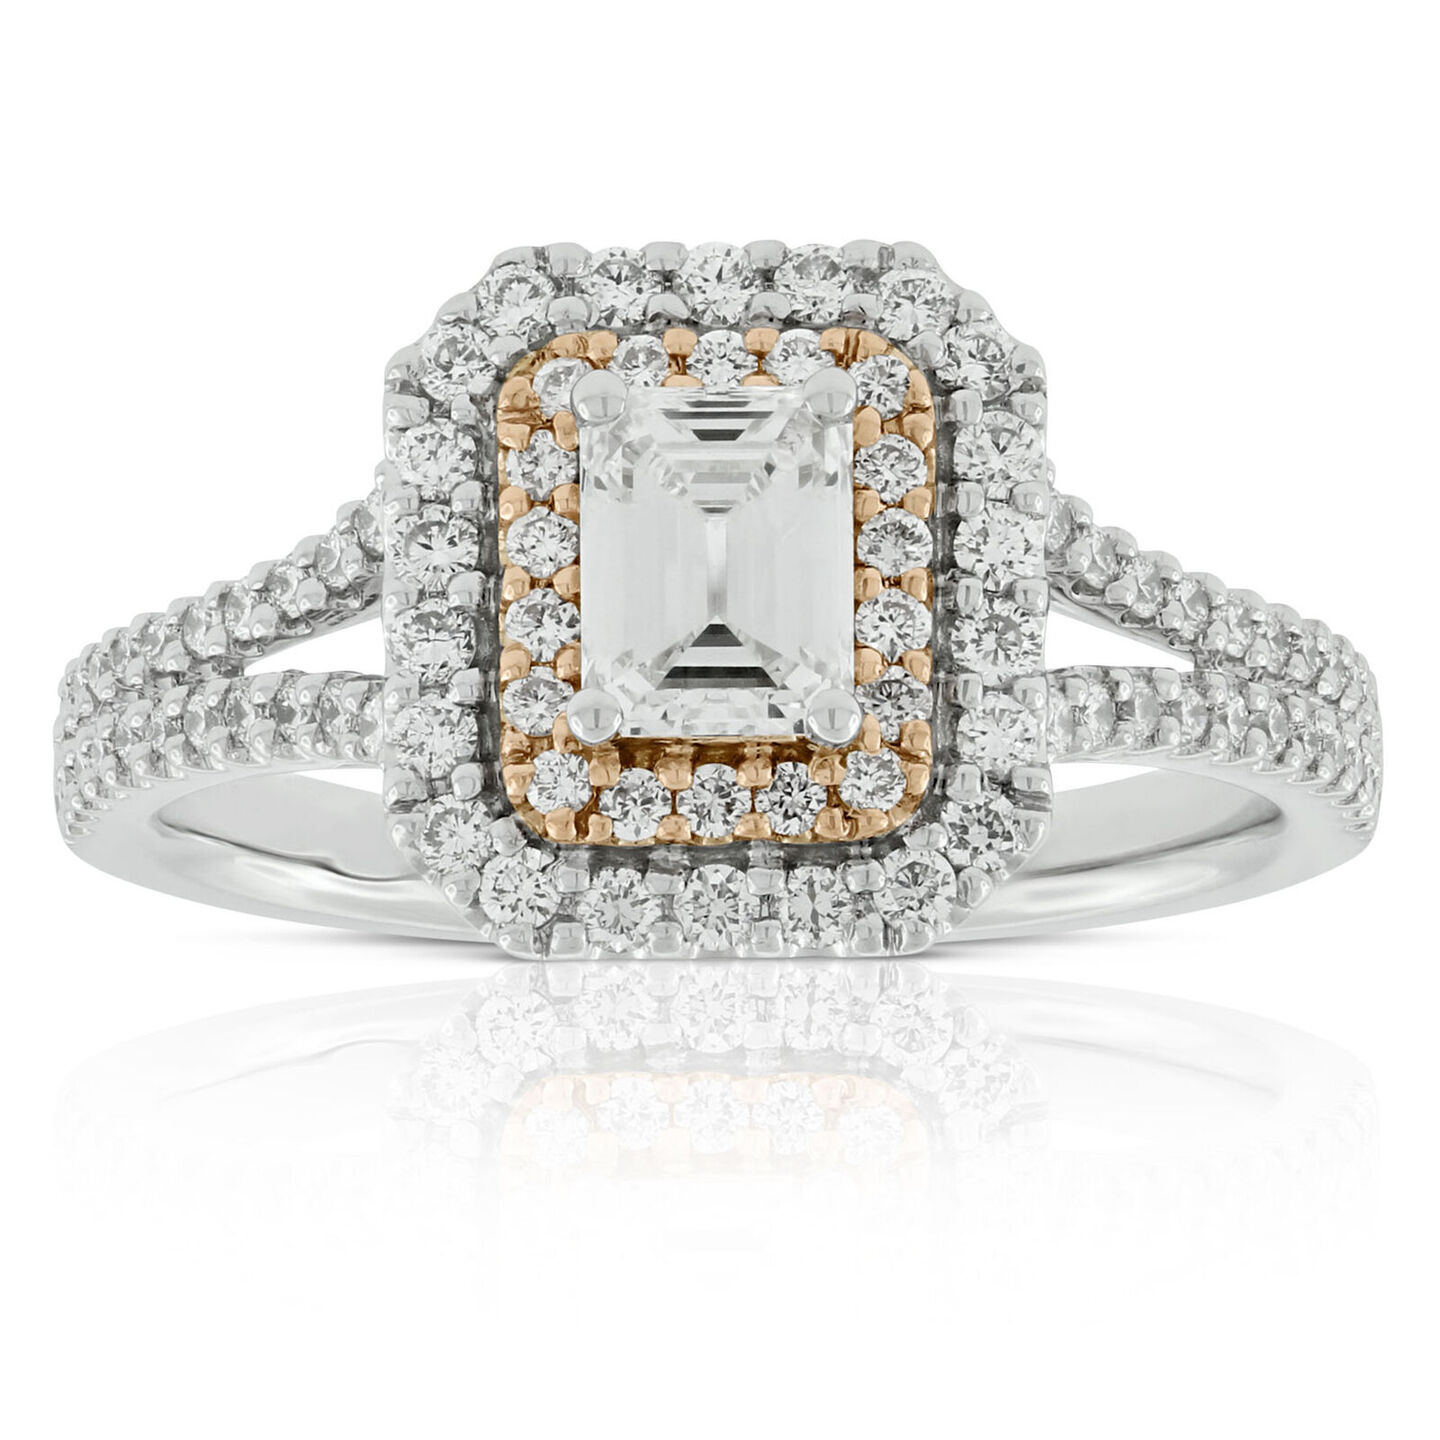 Emerald cut halo diamond ring against a white background